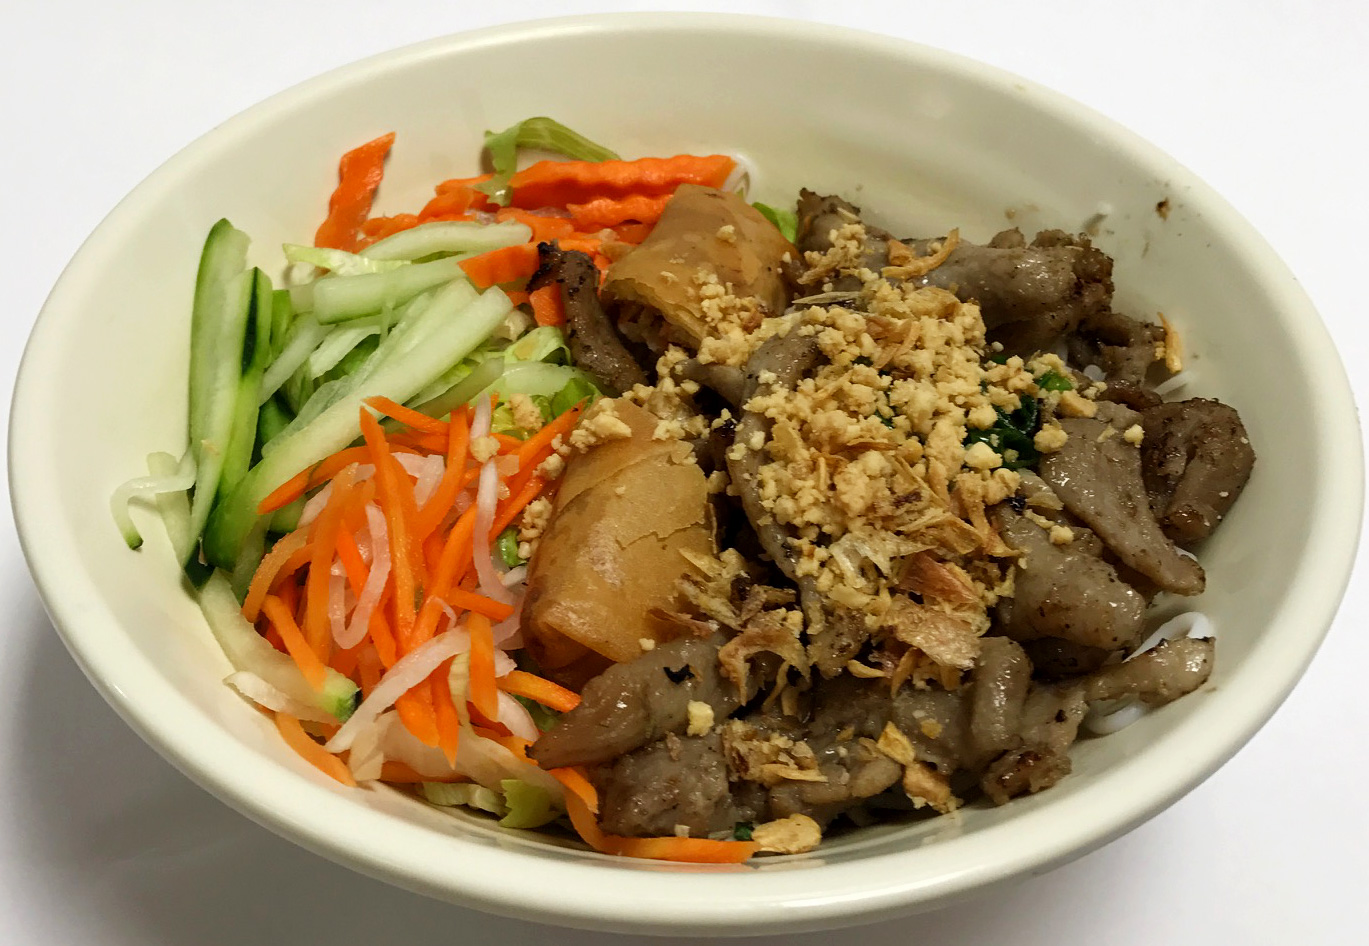 Bun Thit Nuong Cha Gio (Noodle Bowl with Grilled Pork and